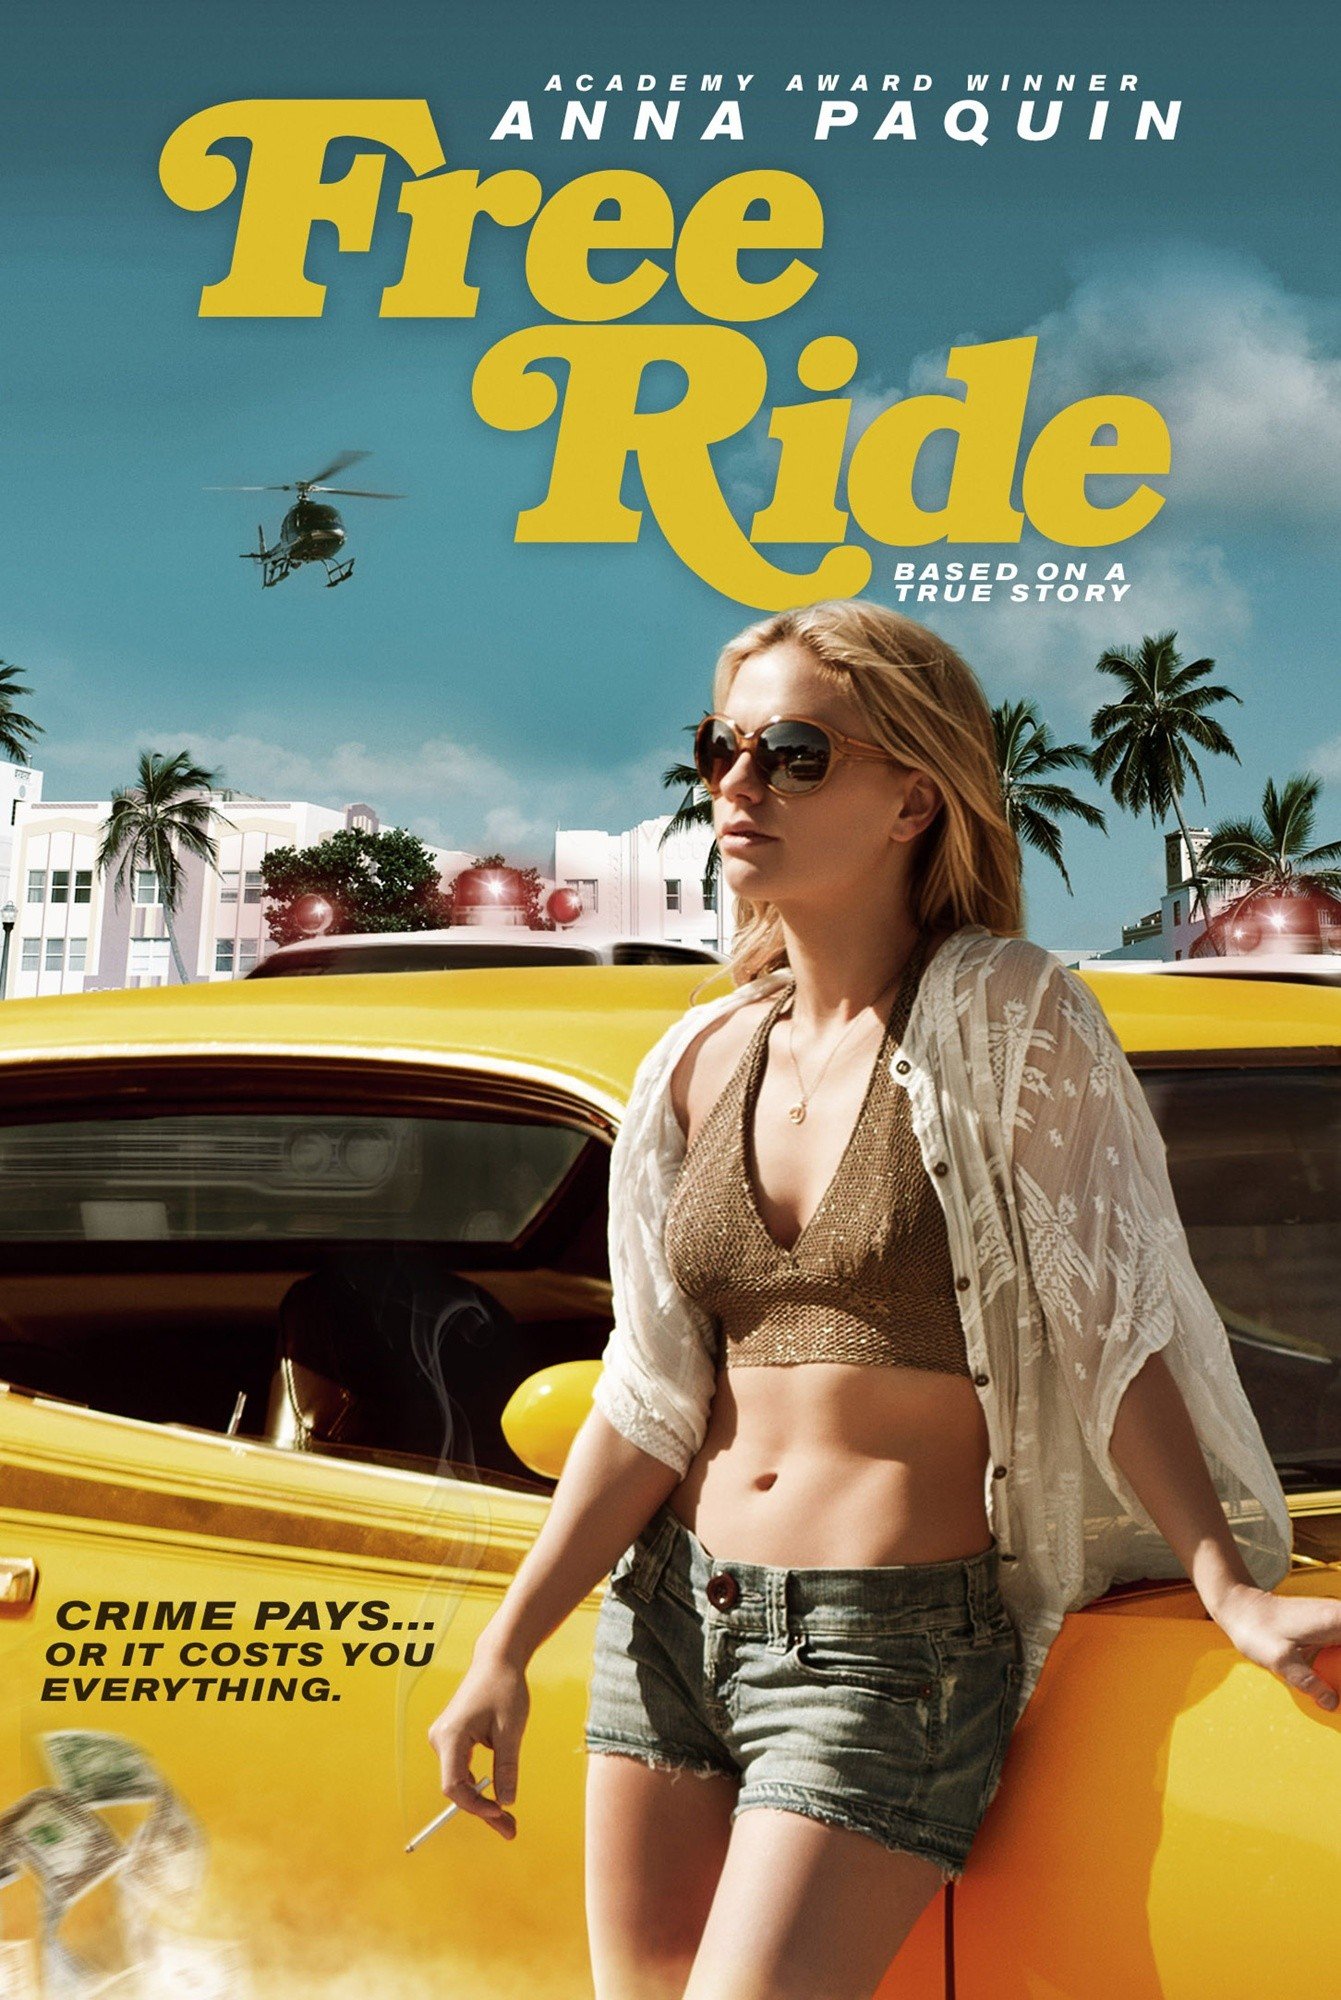 Poster of Phase 4 Films' Free Ride (2014)